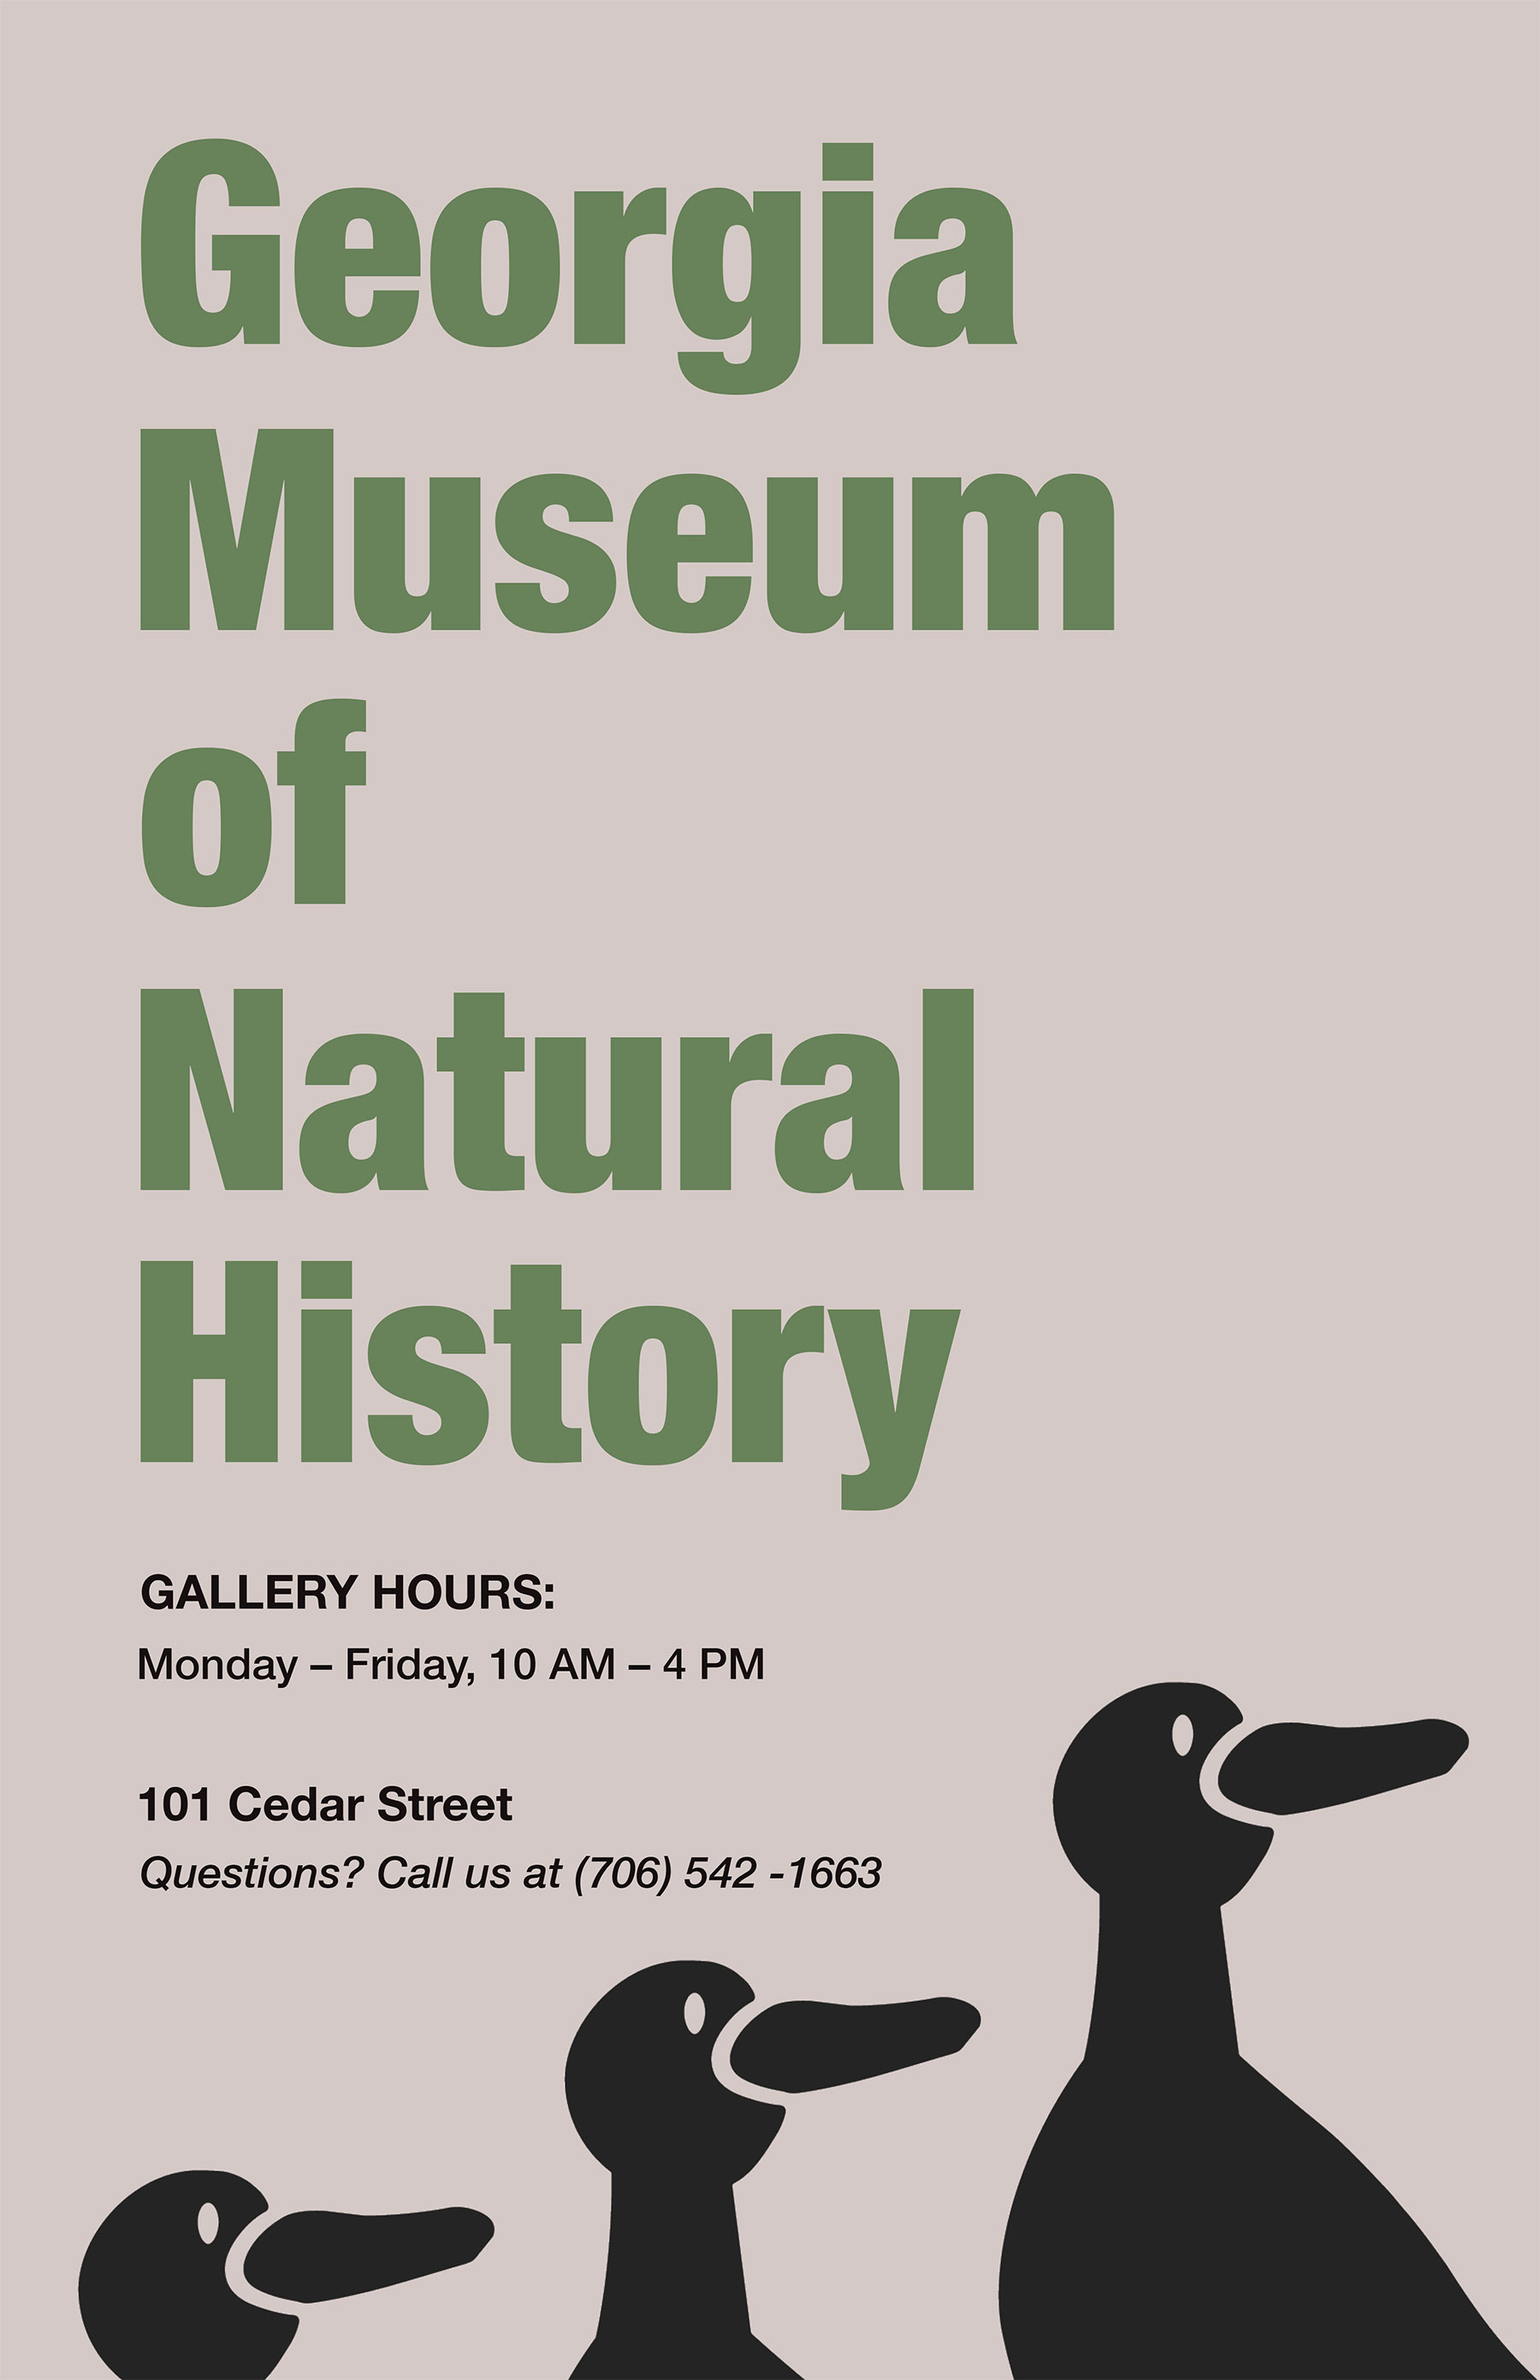 Version one of a poster using the duck icon. Title: Georgia Museum of Natural History. Subtitle 1: Gallery Hours. Subtitle 2: 101 Cedar Street.